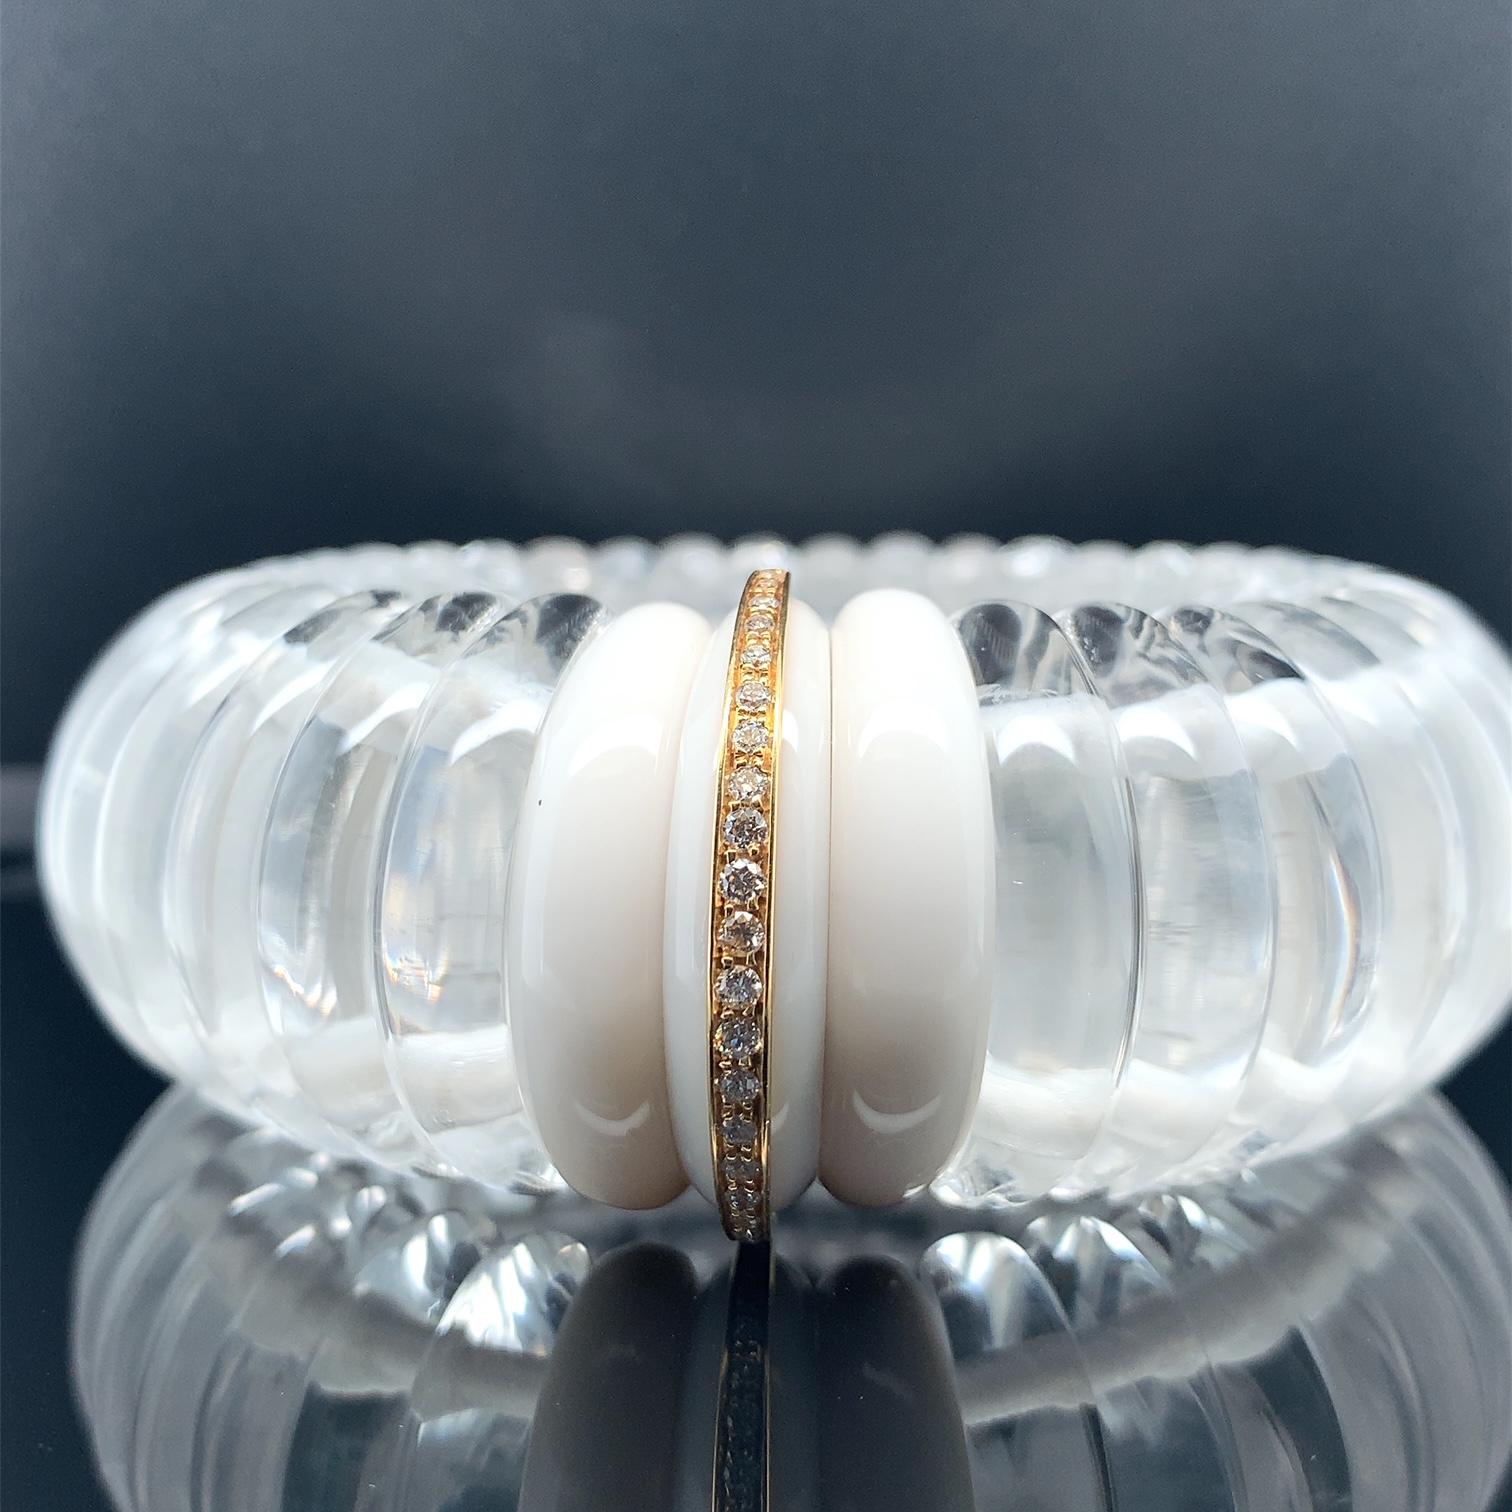 This handsome Italian cuff bracelet is made of elegant rock crystal 